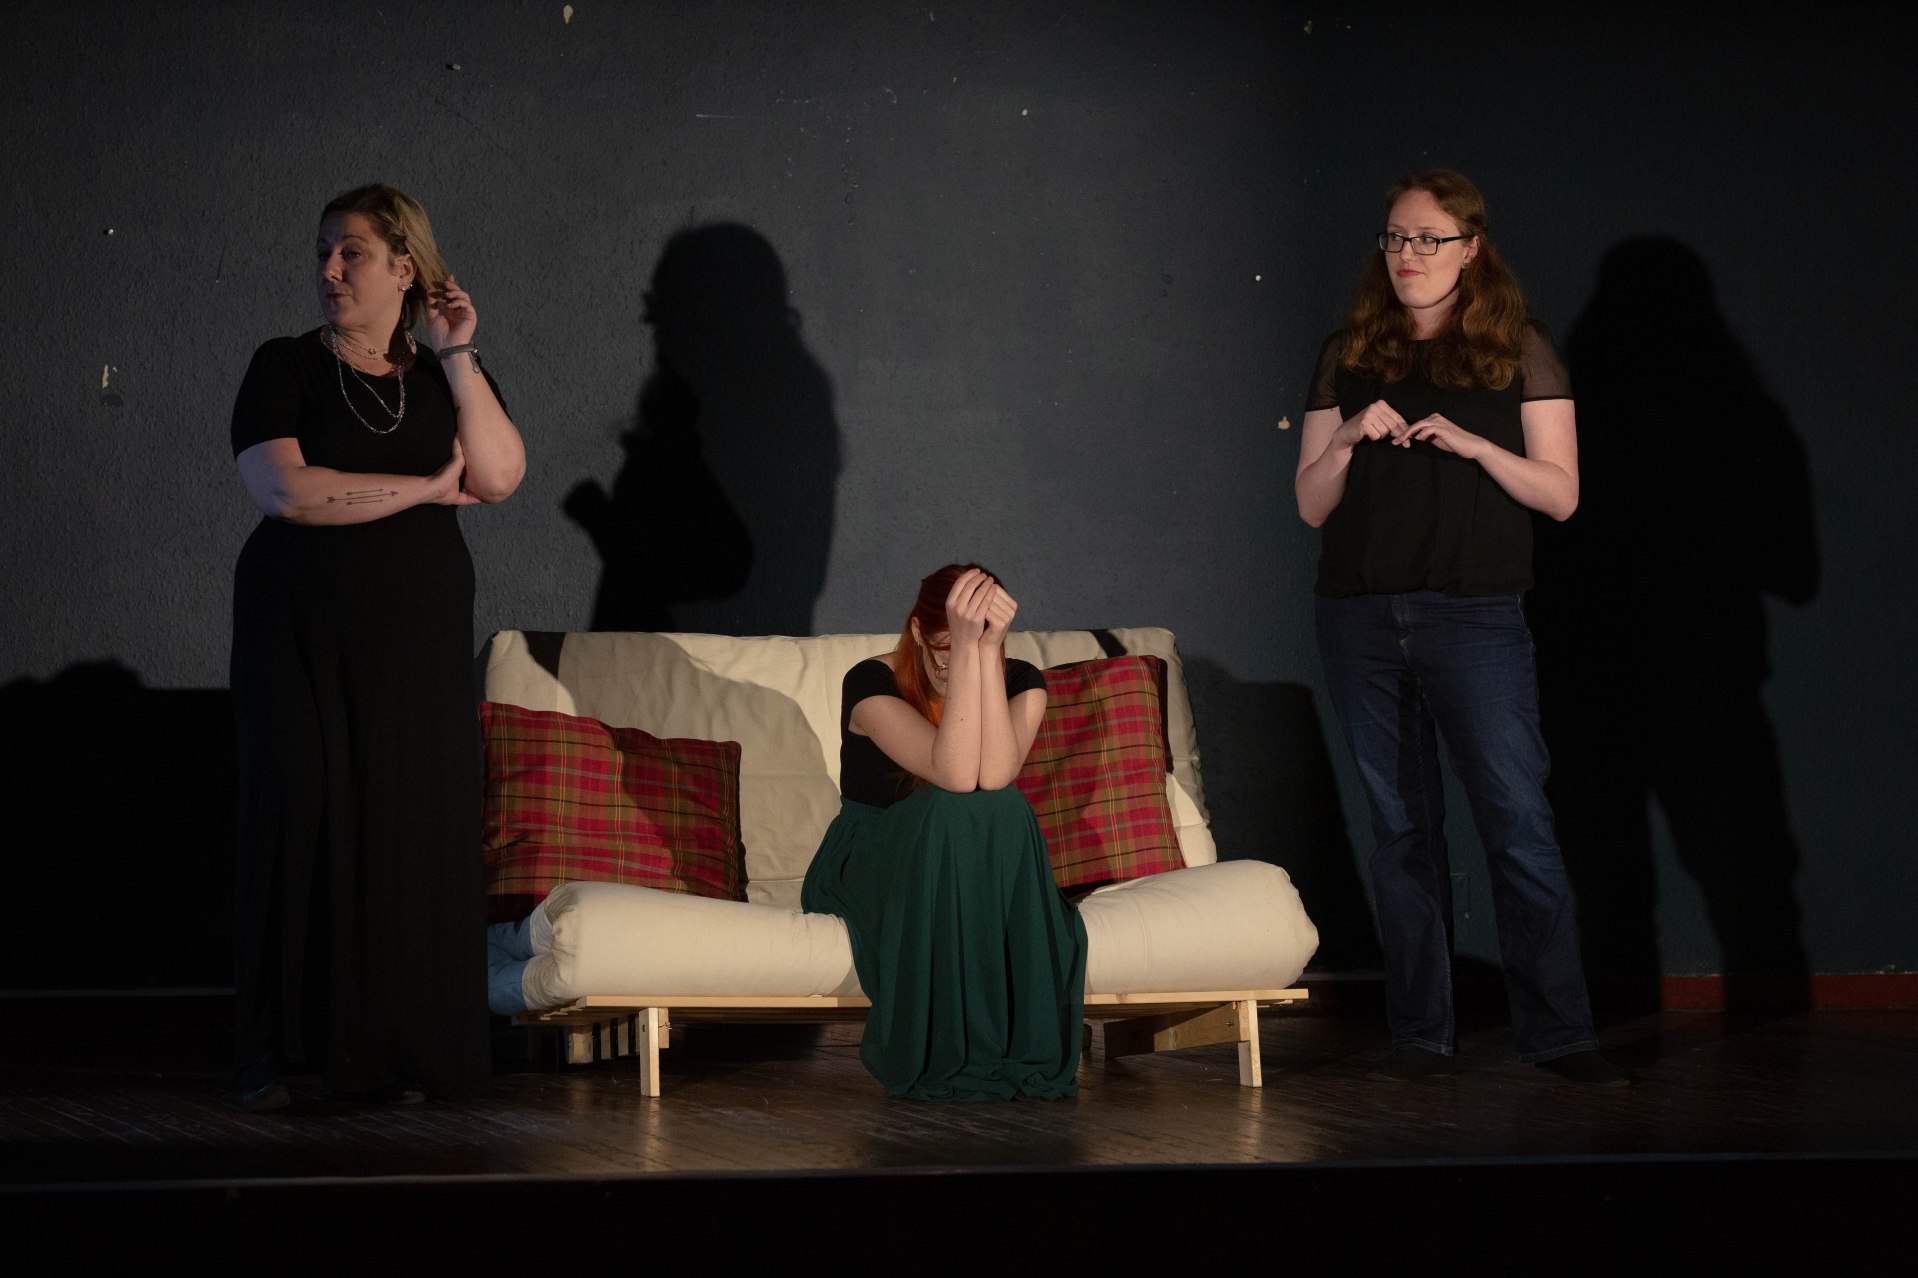 Three women on stage performing a play